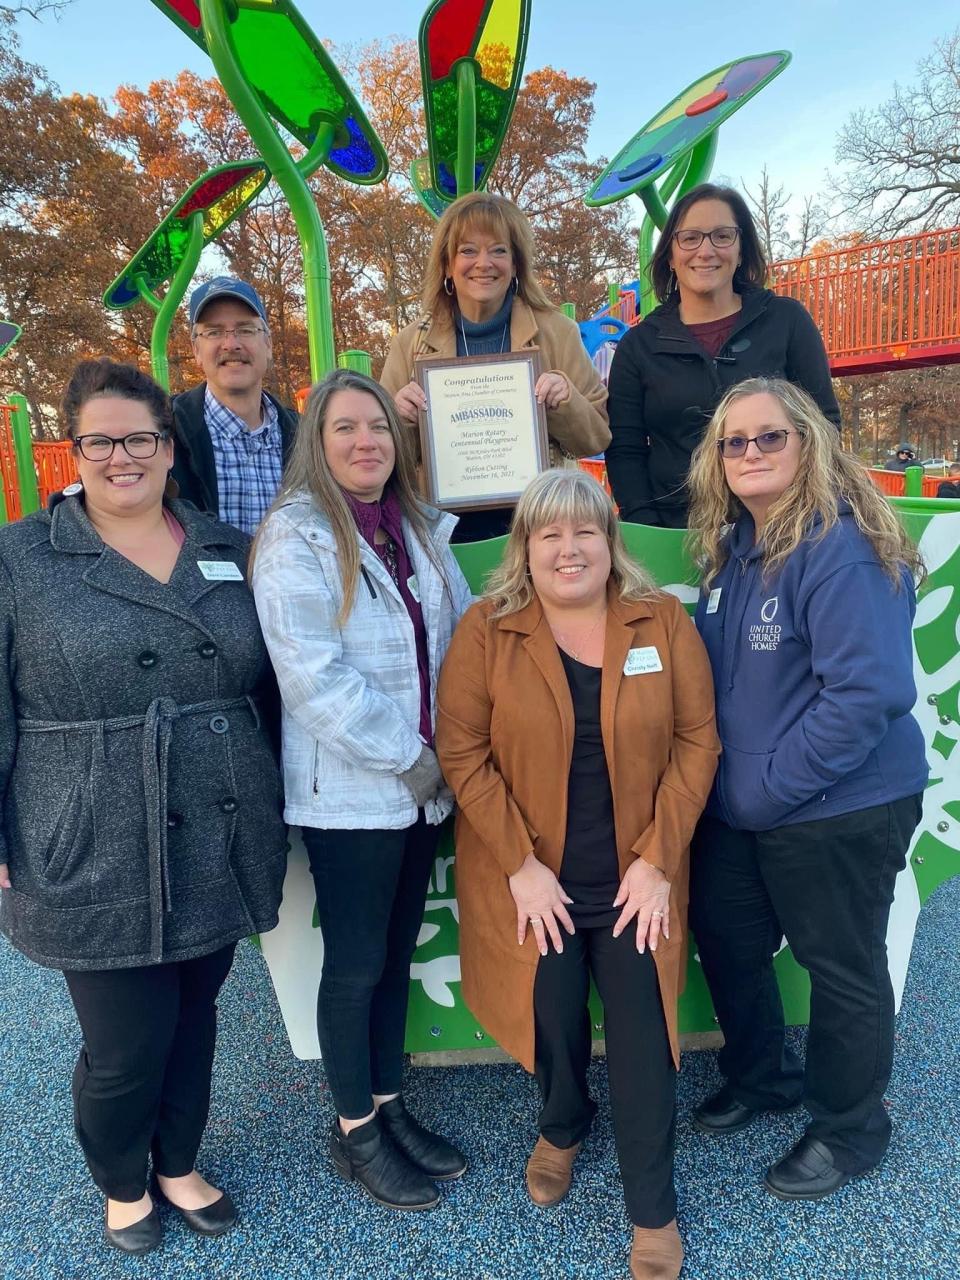 This photo was taken at the Marion Area Chamber of Commerce Ribbon Cutting Ceremony at the Marion Rotary Centennial Playground. Pictured are PEP Club board members from left to right: Danielle Landon, Chris Simon, Ashley Teets, Becky Worley, Christy Neff, Lori Seckel and Christina Golden.